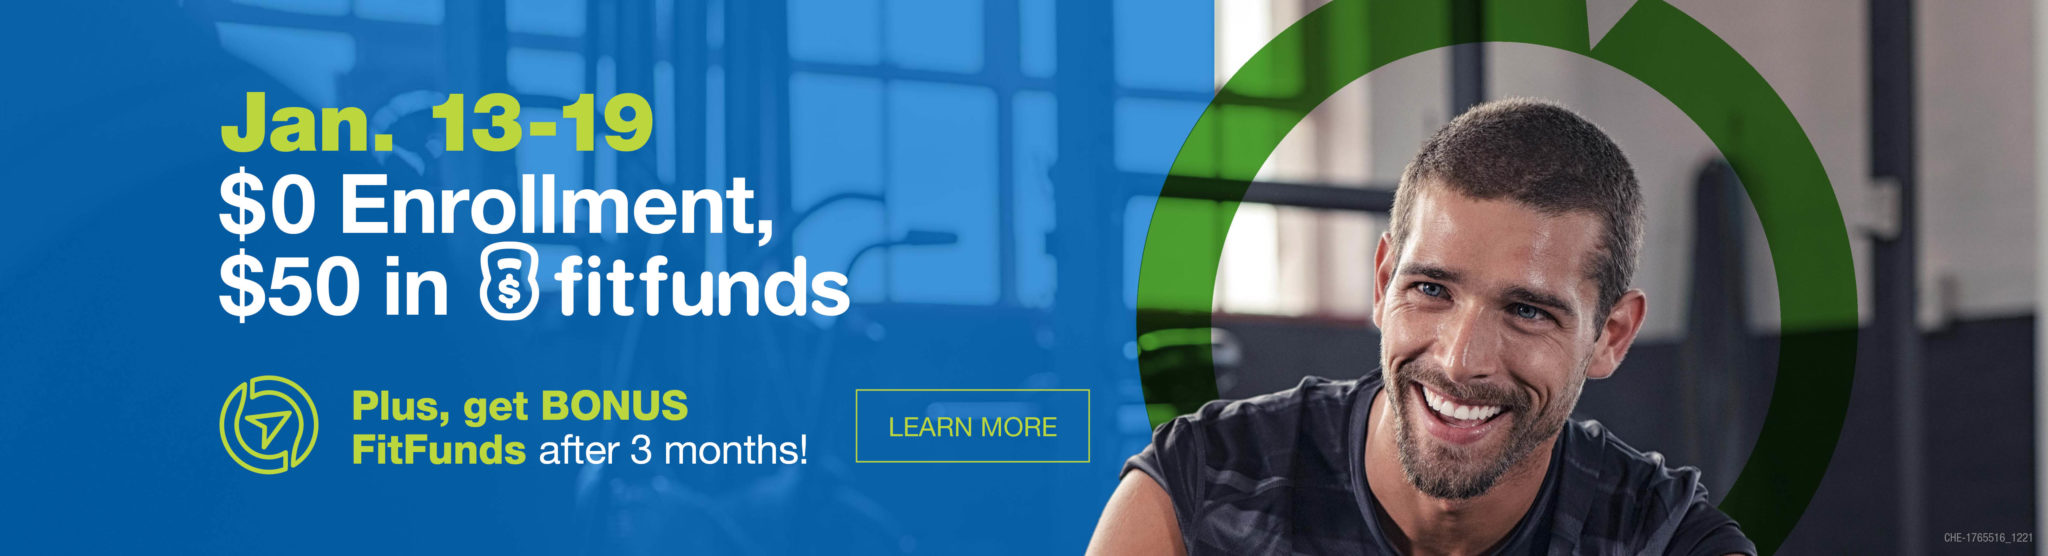 Jan. 13 – 19: $0 Enrollment and $50 in FitFunds Plus, get BONUS FitFunds after 3 months!